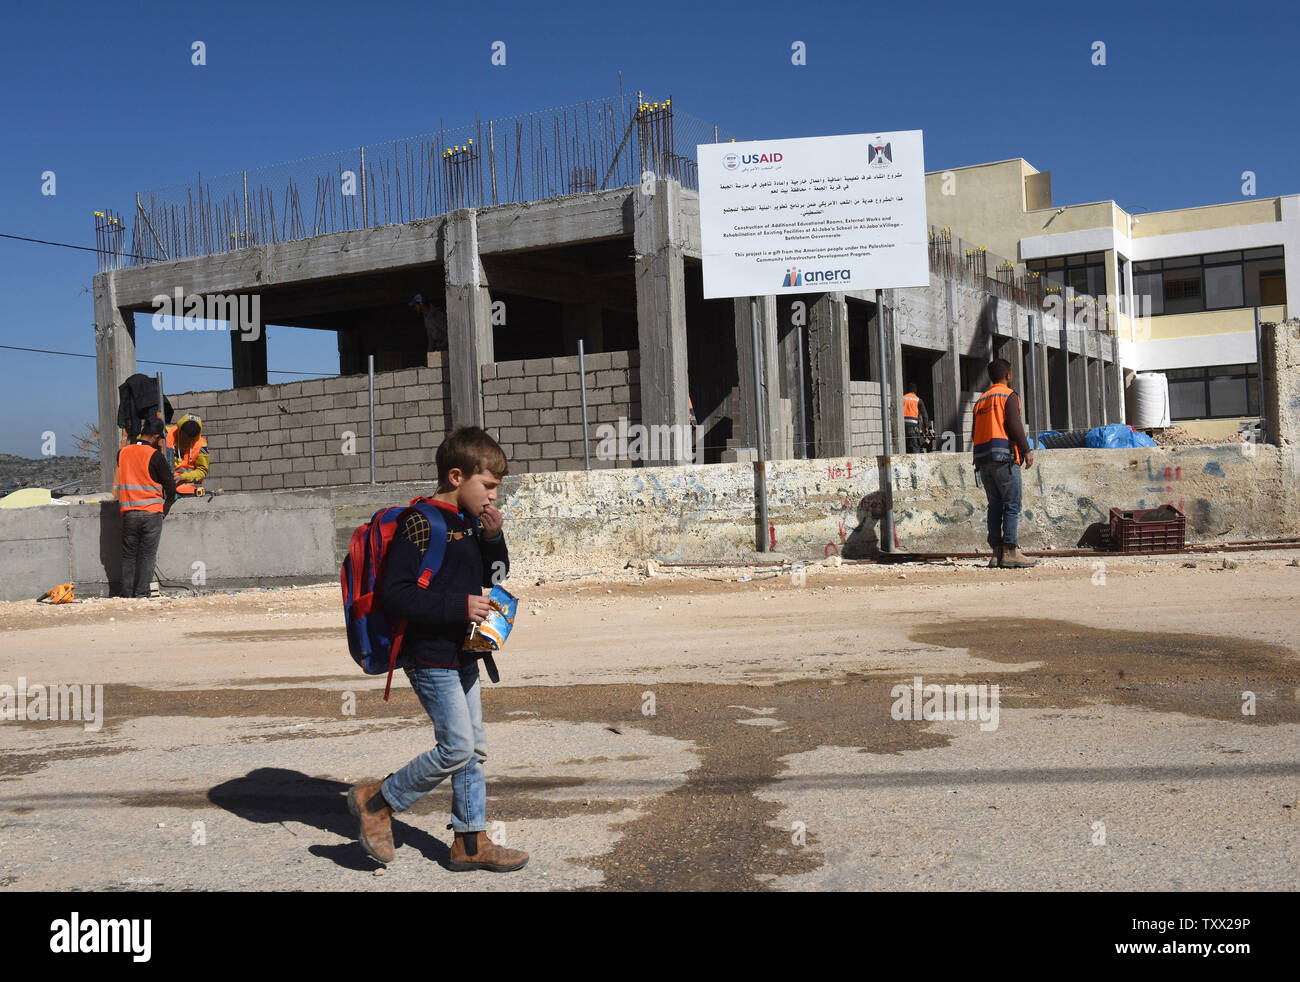 A Palestinian boy eats while walking by construction workers renovating and building an extension to the girl's school in Al-Jabba, near Bethlehem, West Bank, which is funded by USAid, United States Agency for International Development, January 23, 2019. The $1.4 million dollar project will be terminated at the end of January because U.S. President Donald Trump's administration will stop funding Palestinian projects and also because Palestinian Prime Minister Rami Hamdallah has stated that the Palestinian Authority will cease accepting funding from America. The school will be unusable for the Stock Photo